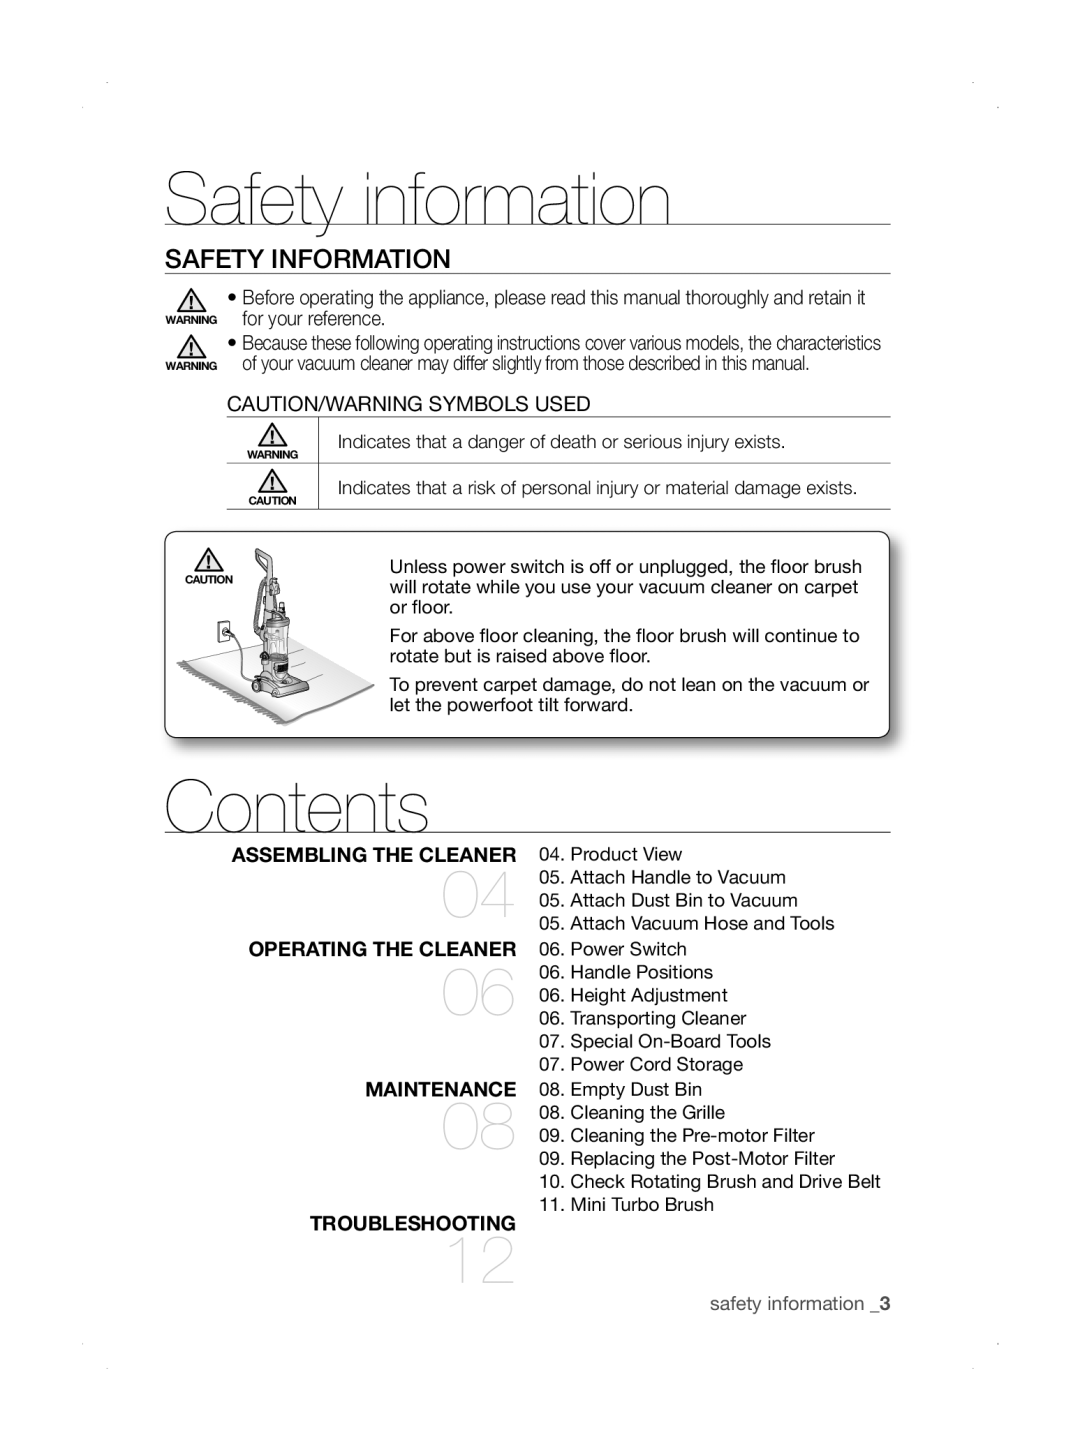 Samsung SU33 Series user manual Contents, Safety Information, assembling the cleaner, OpeRATING The CleANeR, maintenance 